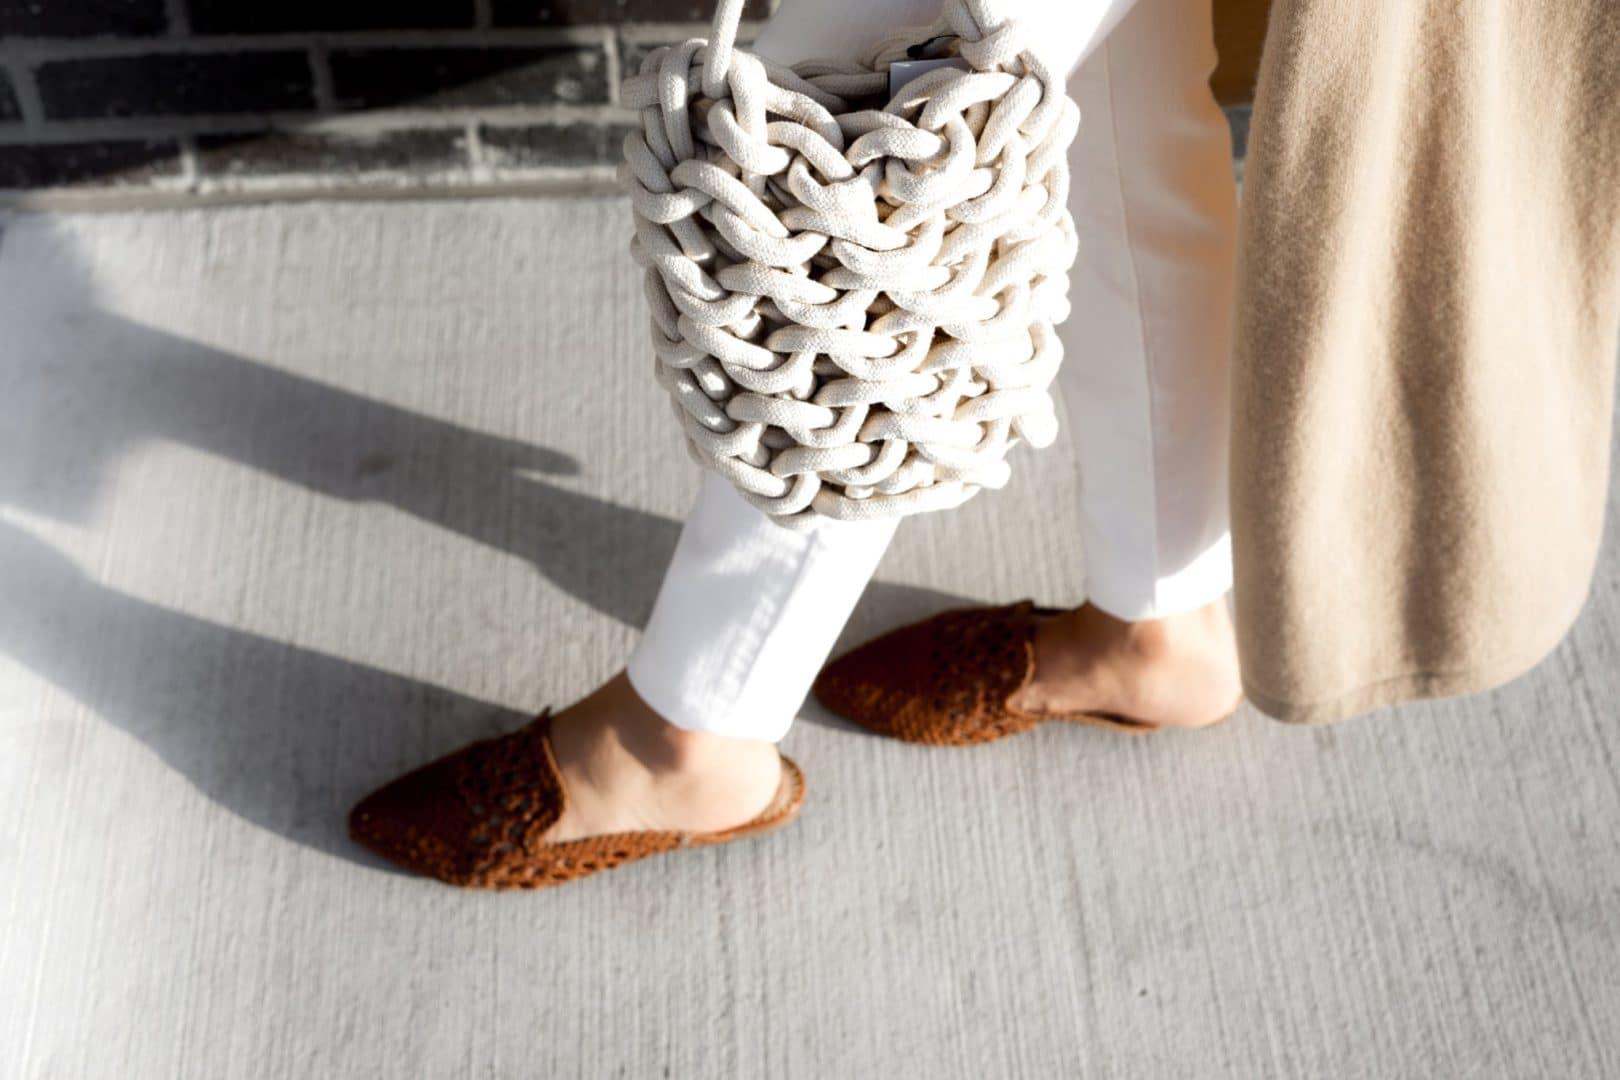 Accessories with Texture - Woven Mules and Rope Bag